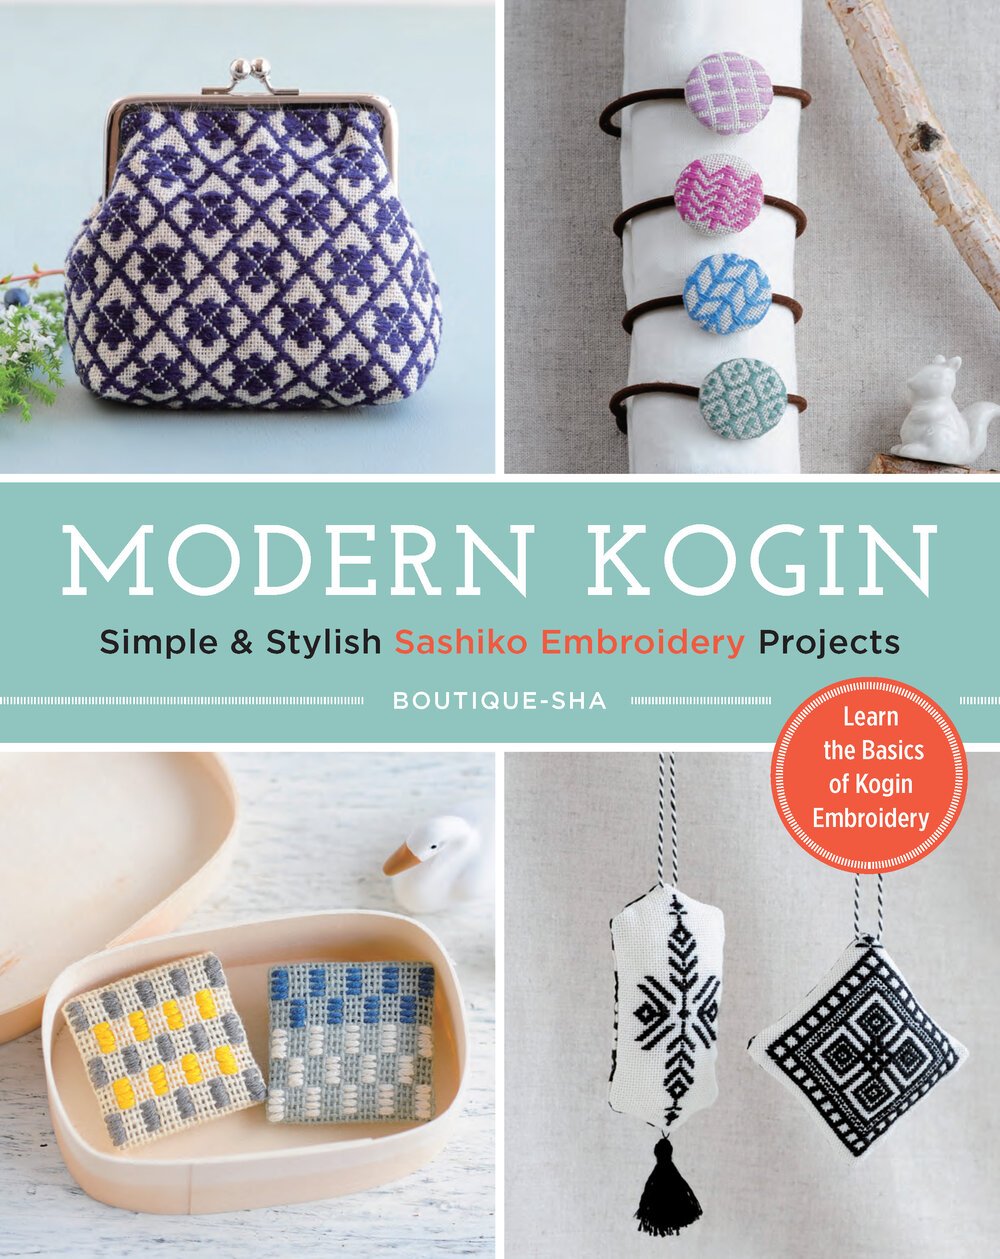 9 Embroidery Books That Offer Step-by-Step Instruction to Stitching  Colorful Modern Projects